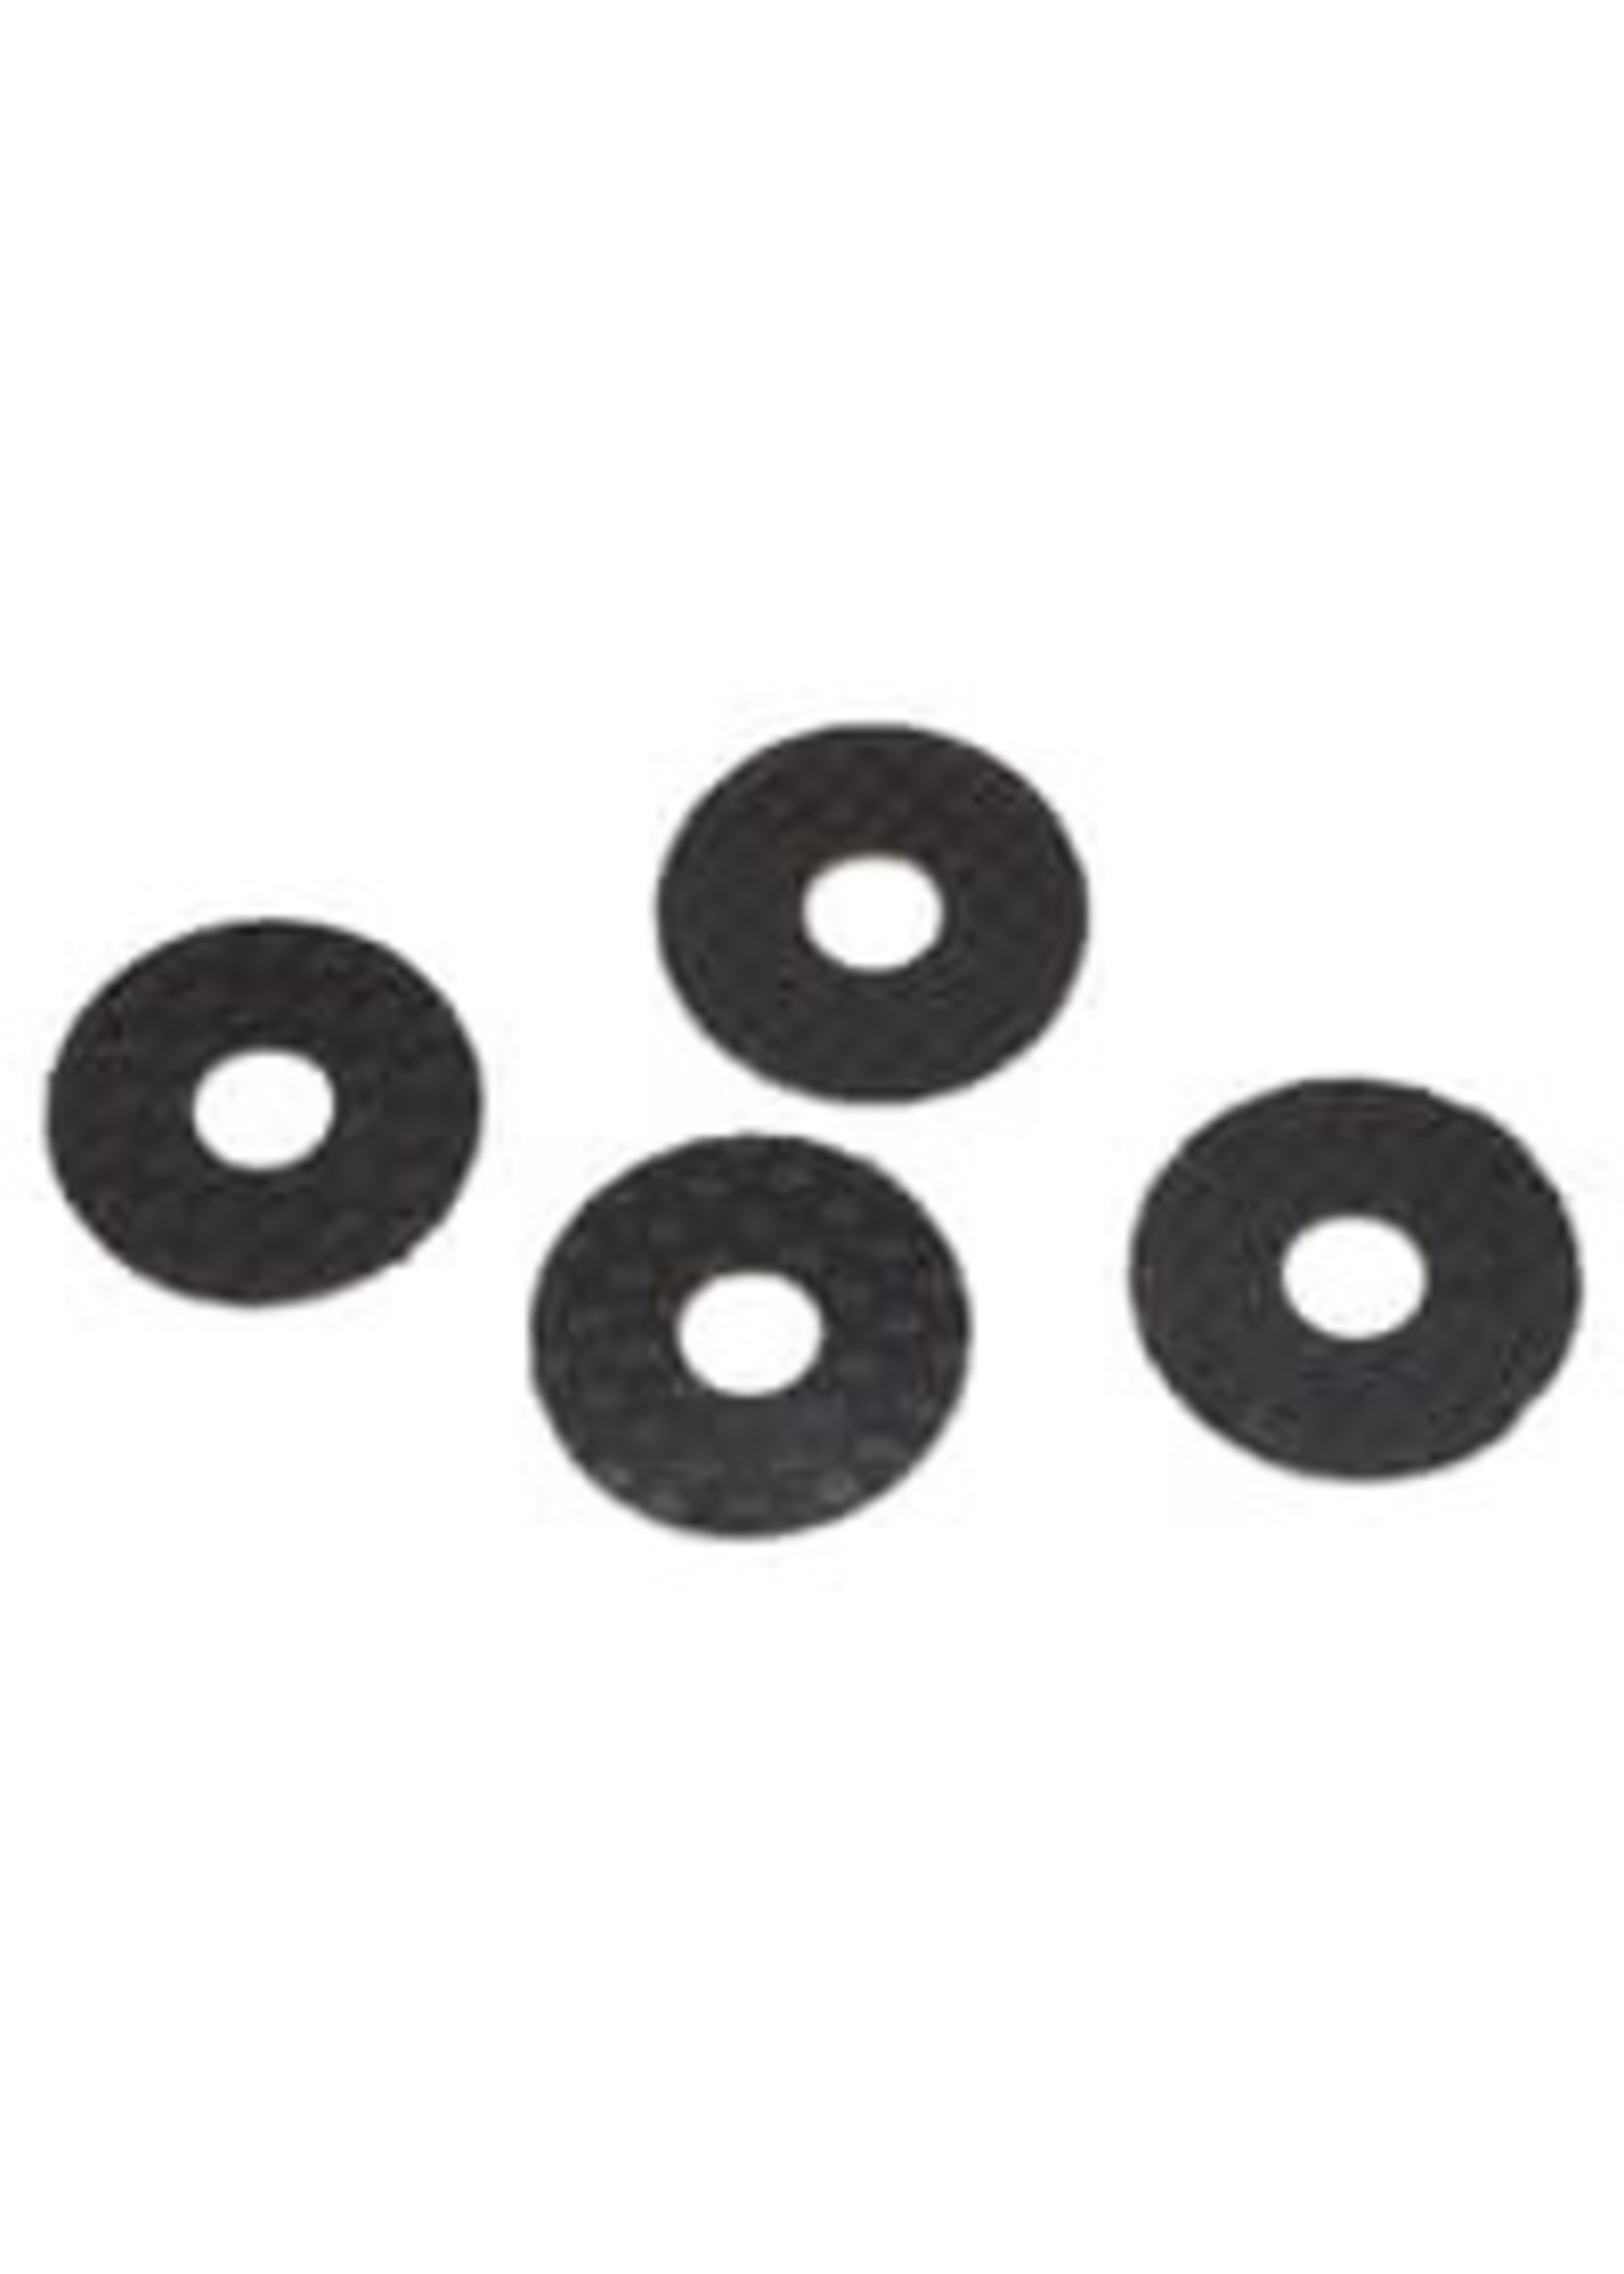 1UP Racing 1UP10401 1UP Racing 6mm Carbon Fiber Body Washers (4)